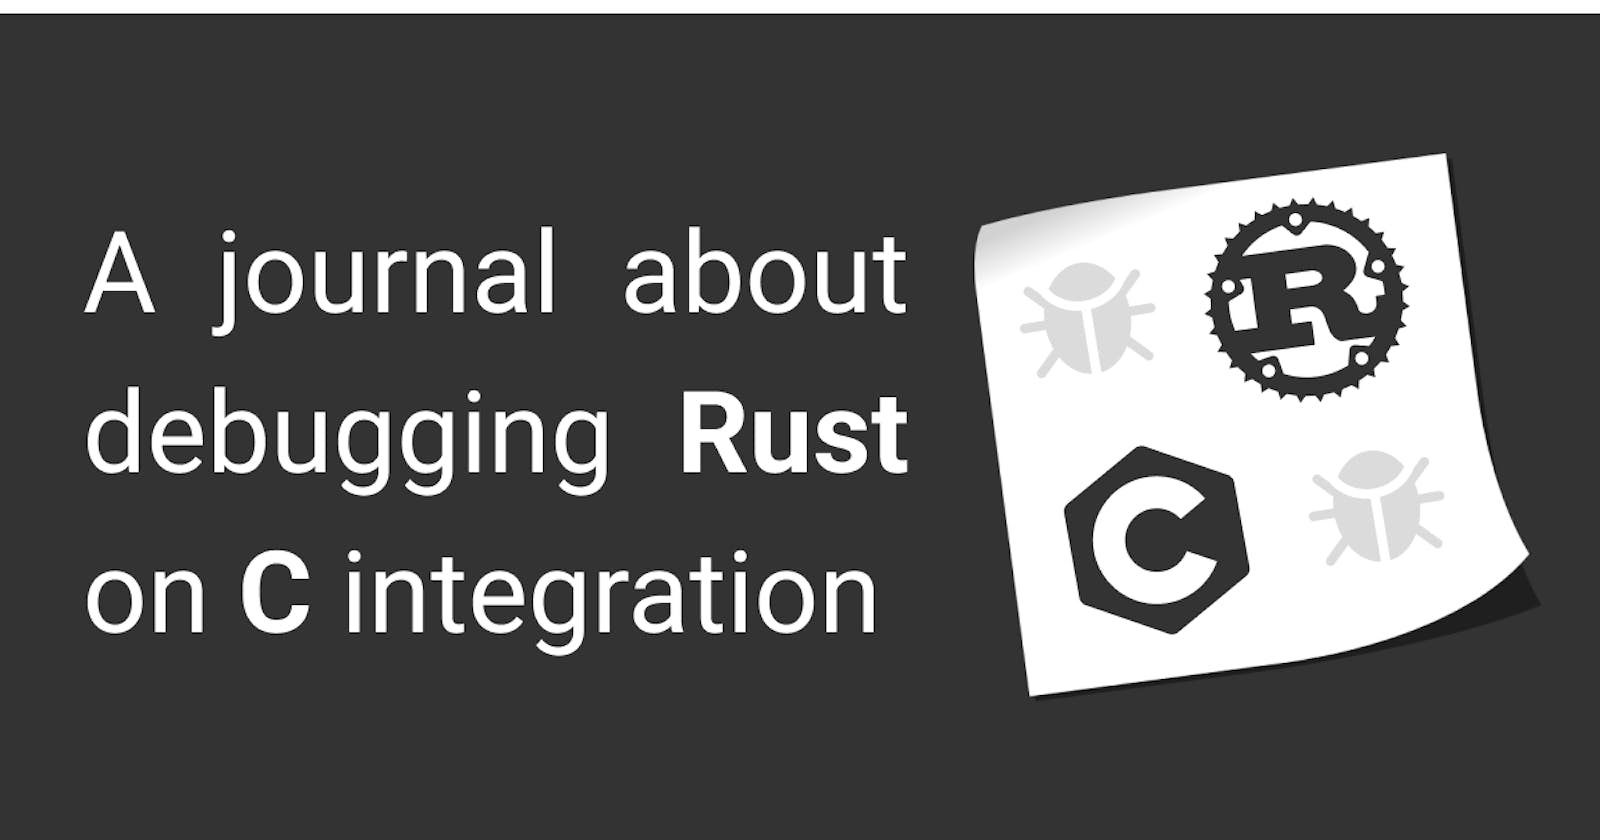 A journal about debugging Rust on C integration